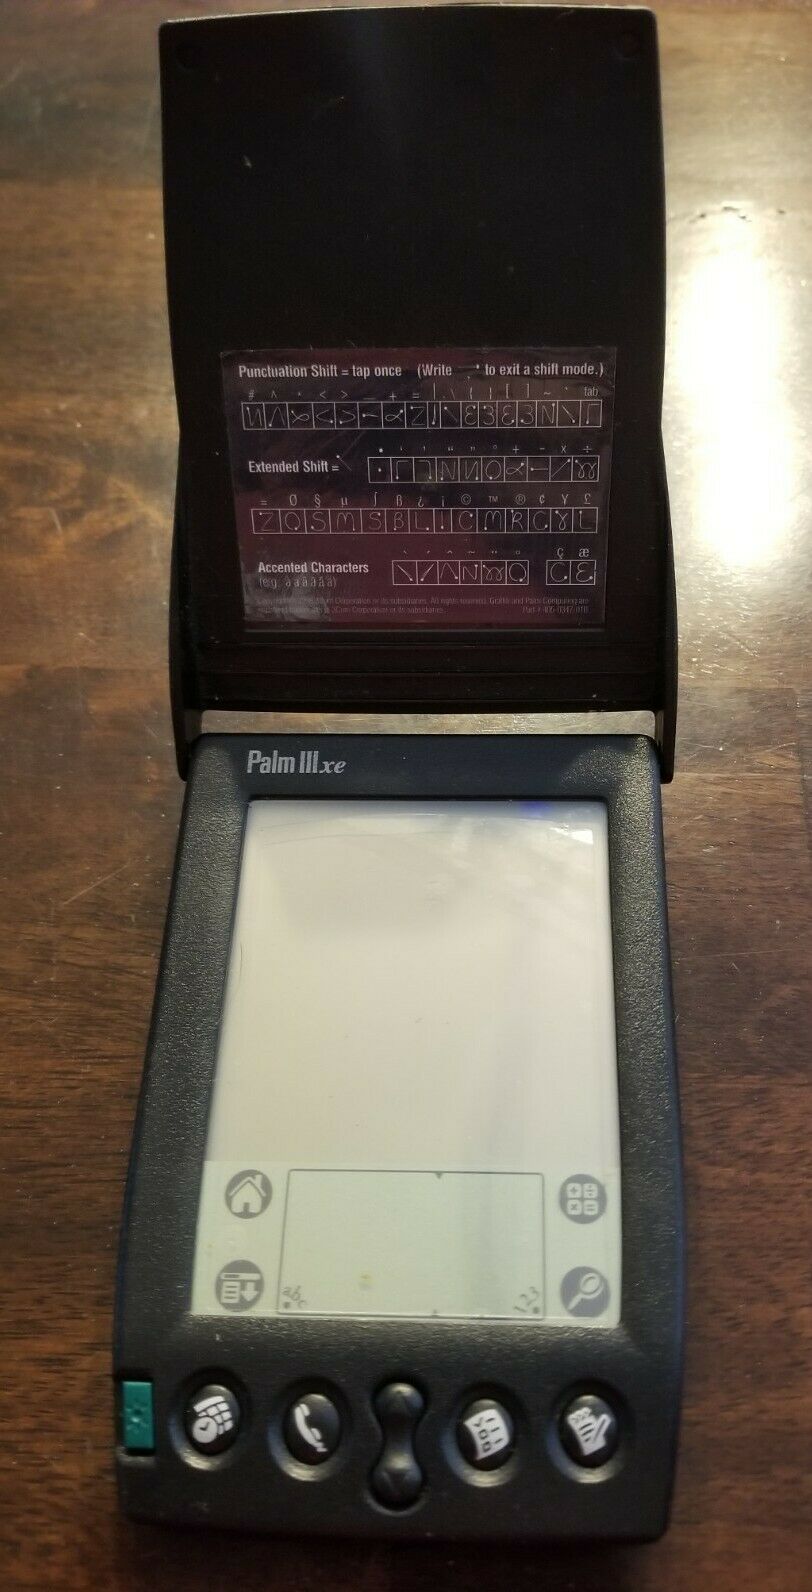 Vintage Palm Pilot Iiixe Iii 3 Xe Lcd Organizer Digital Pda With Attached Cover